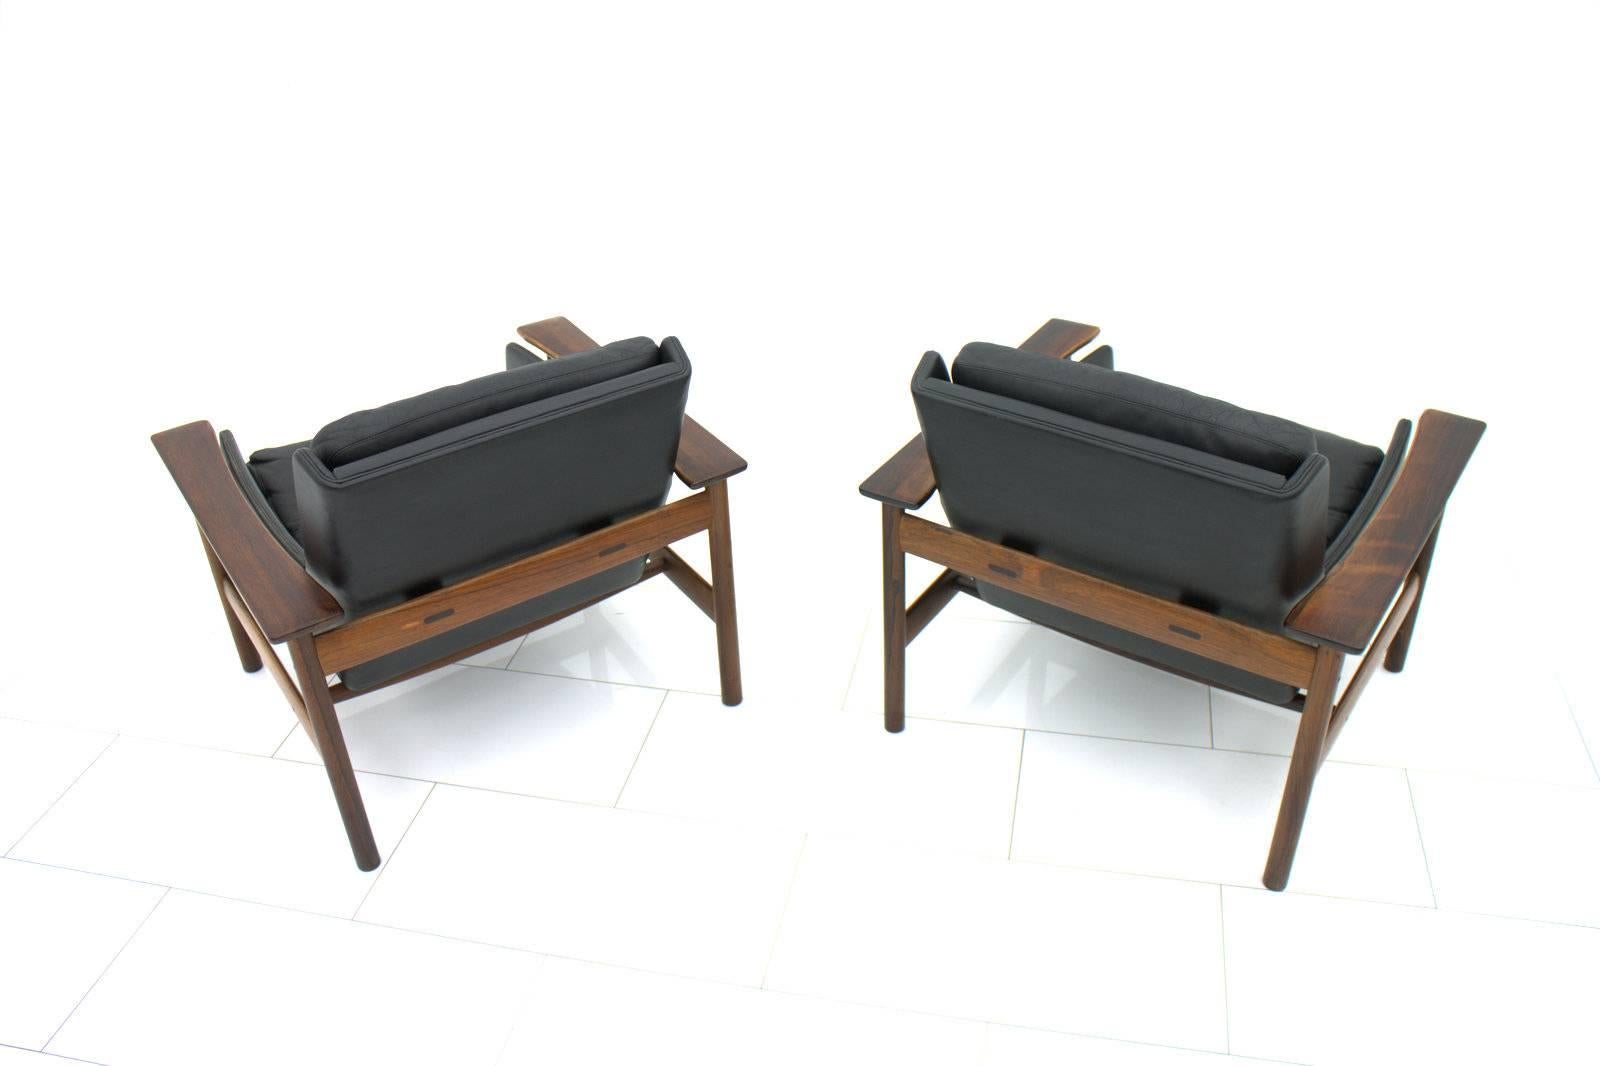 Norwegian Pair of Rosewood and Leather Lounge Chairs by Sven Ivar Dysthe for Dokka